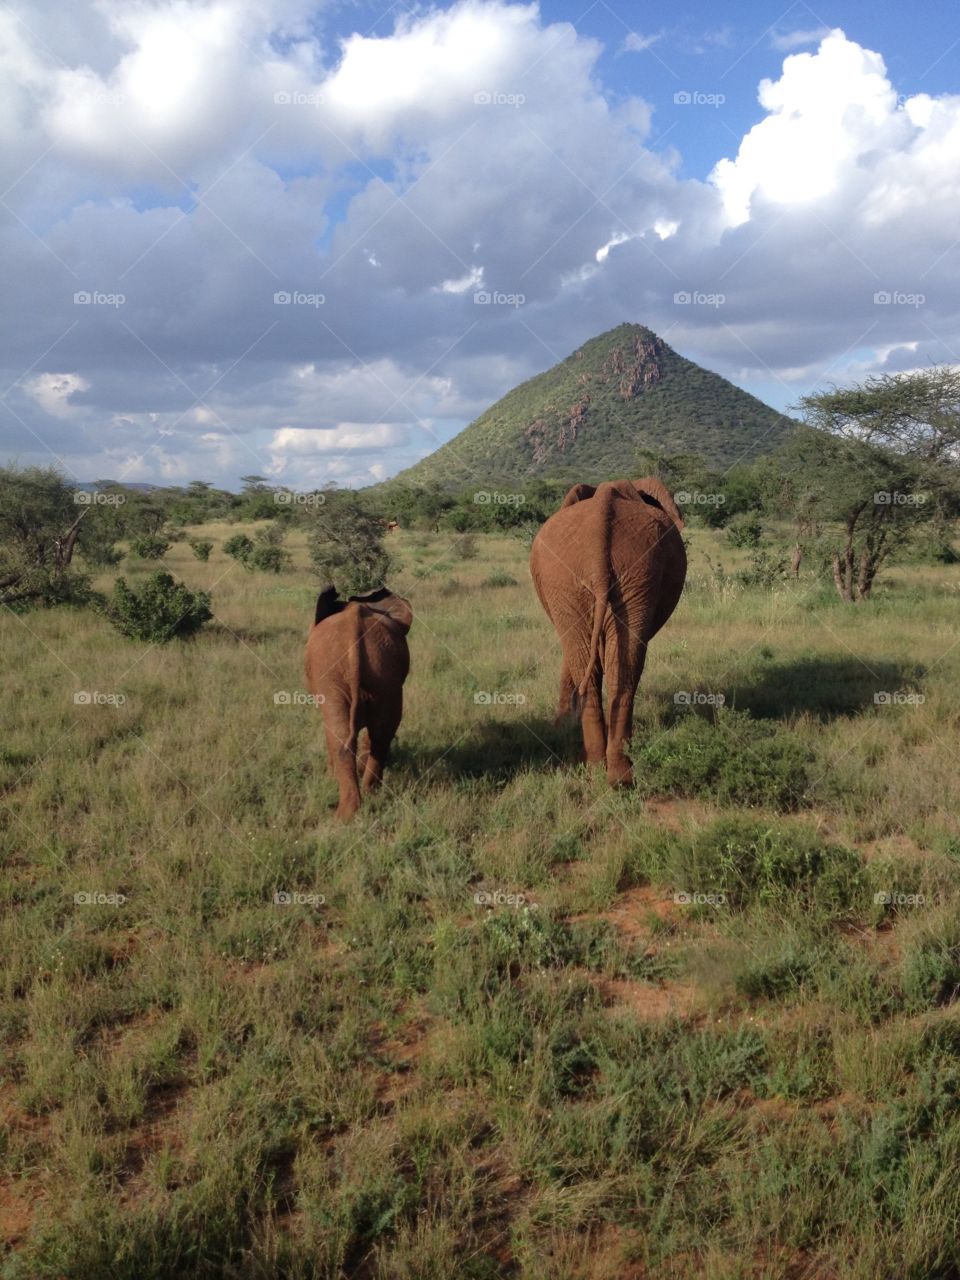 Elephant and her calf taking a stroll in one of Kenya's National Parks. 